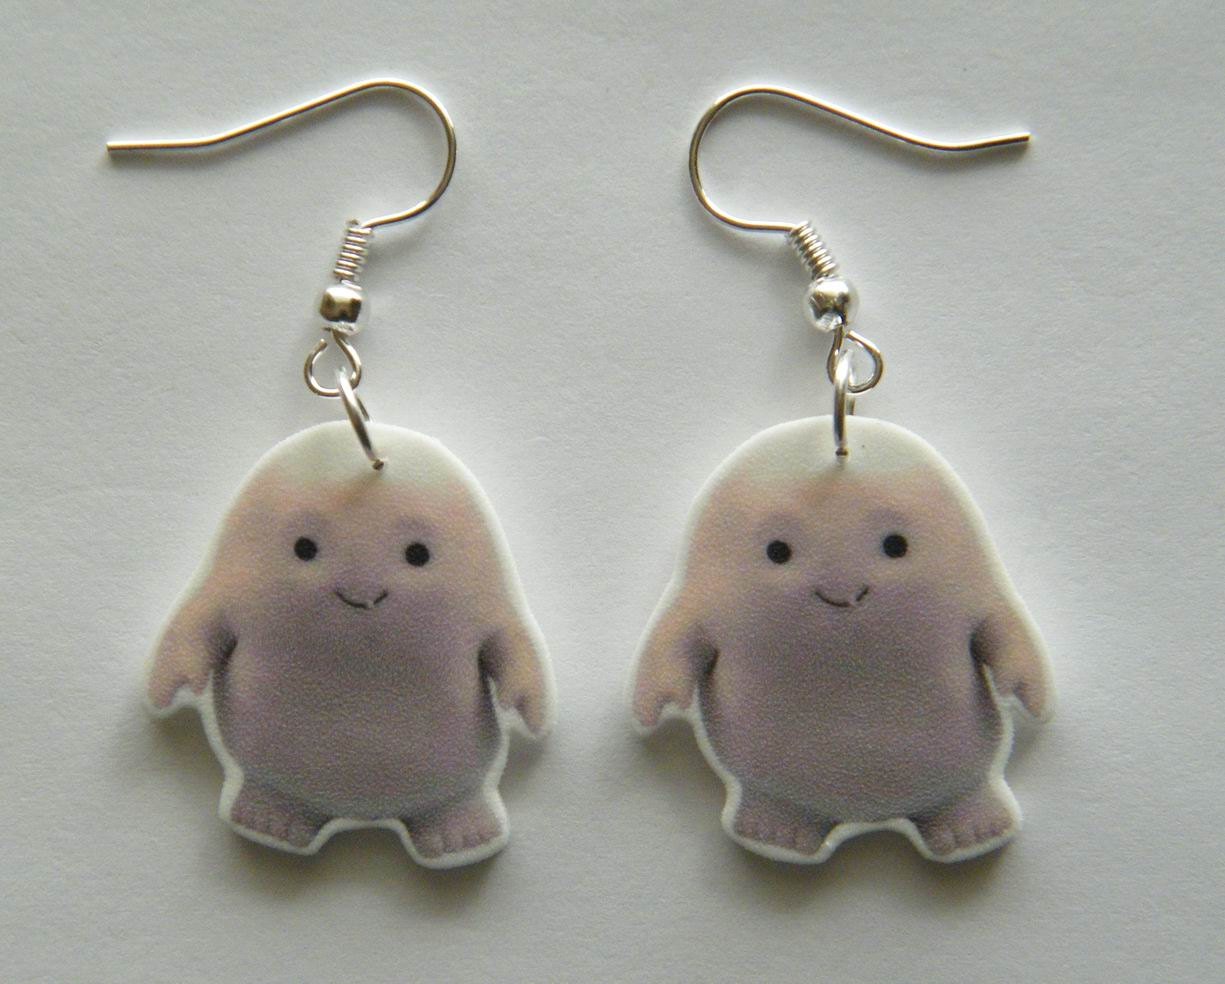 Dr Who  Earrings The Adipose babies one of the cutest  aliens